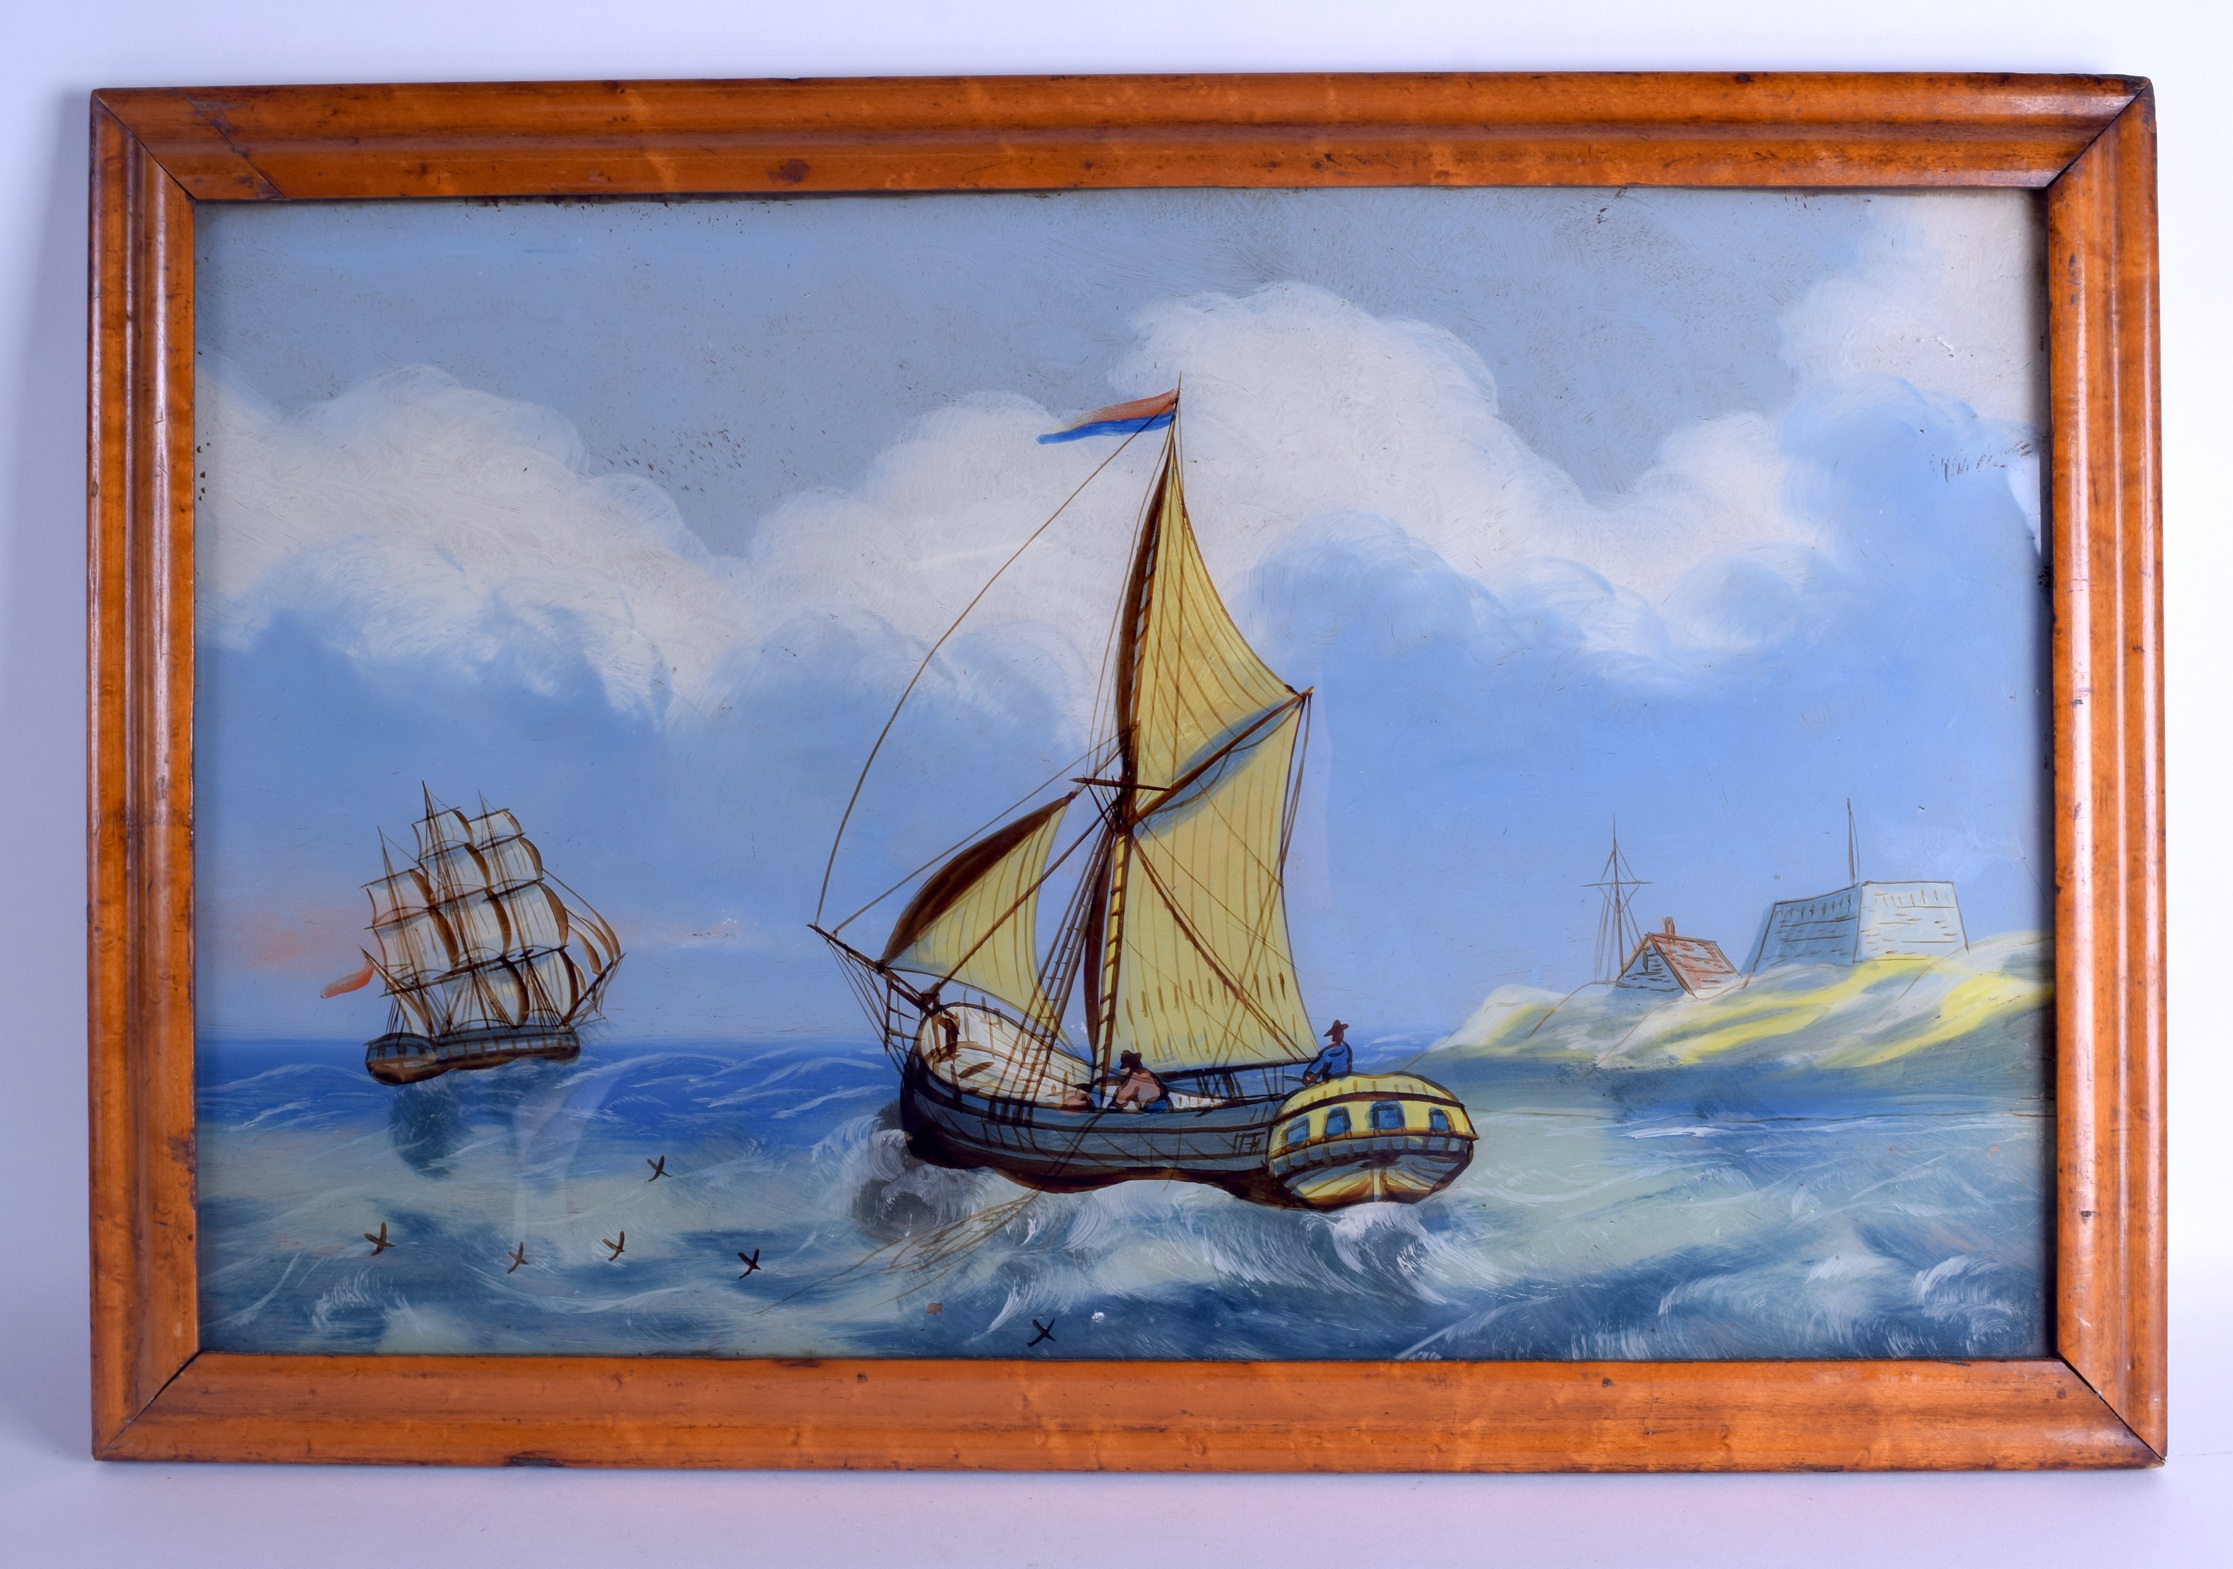 A VICTORIAN REVERSE PAINTED GLASS MARITIME PANEL depicting a boat in full sail leaving a port. Image